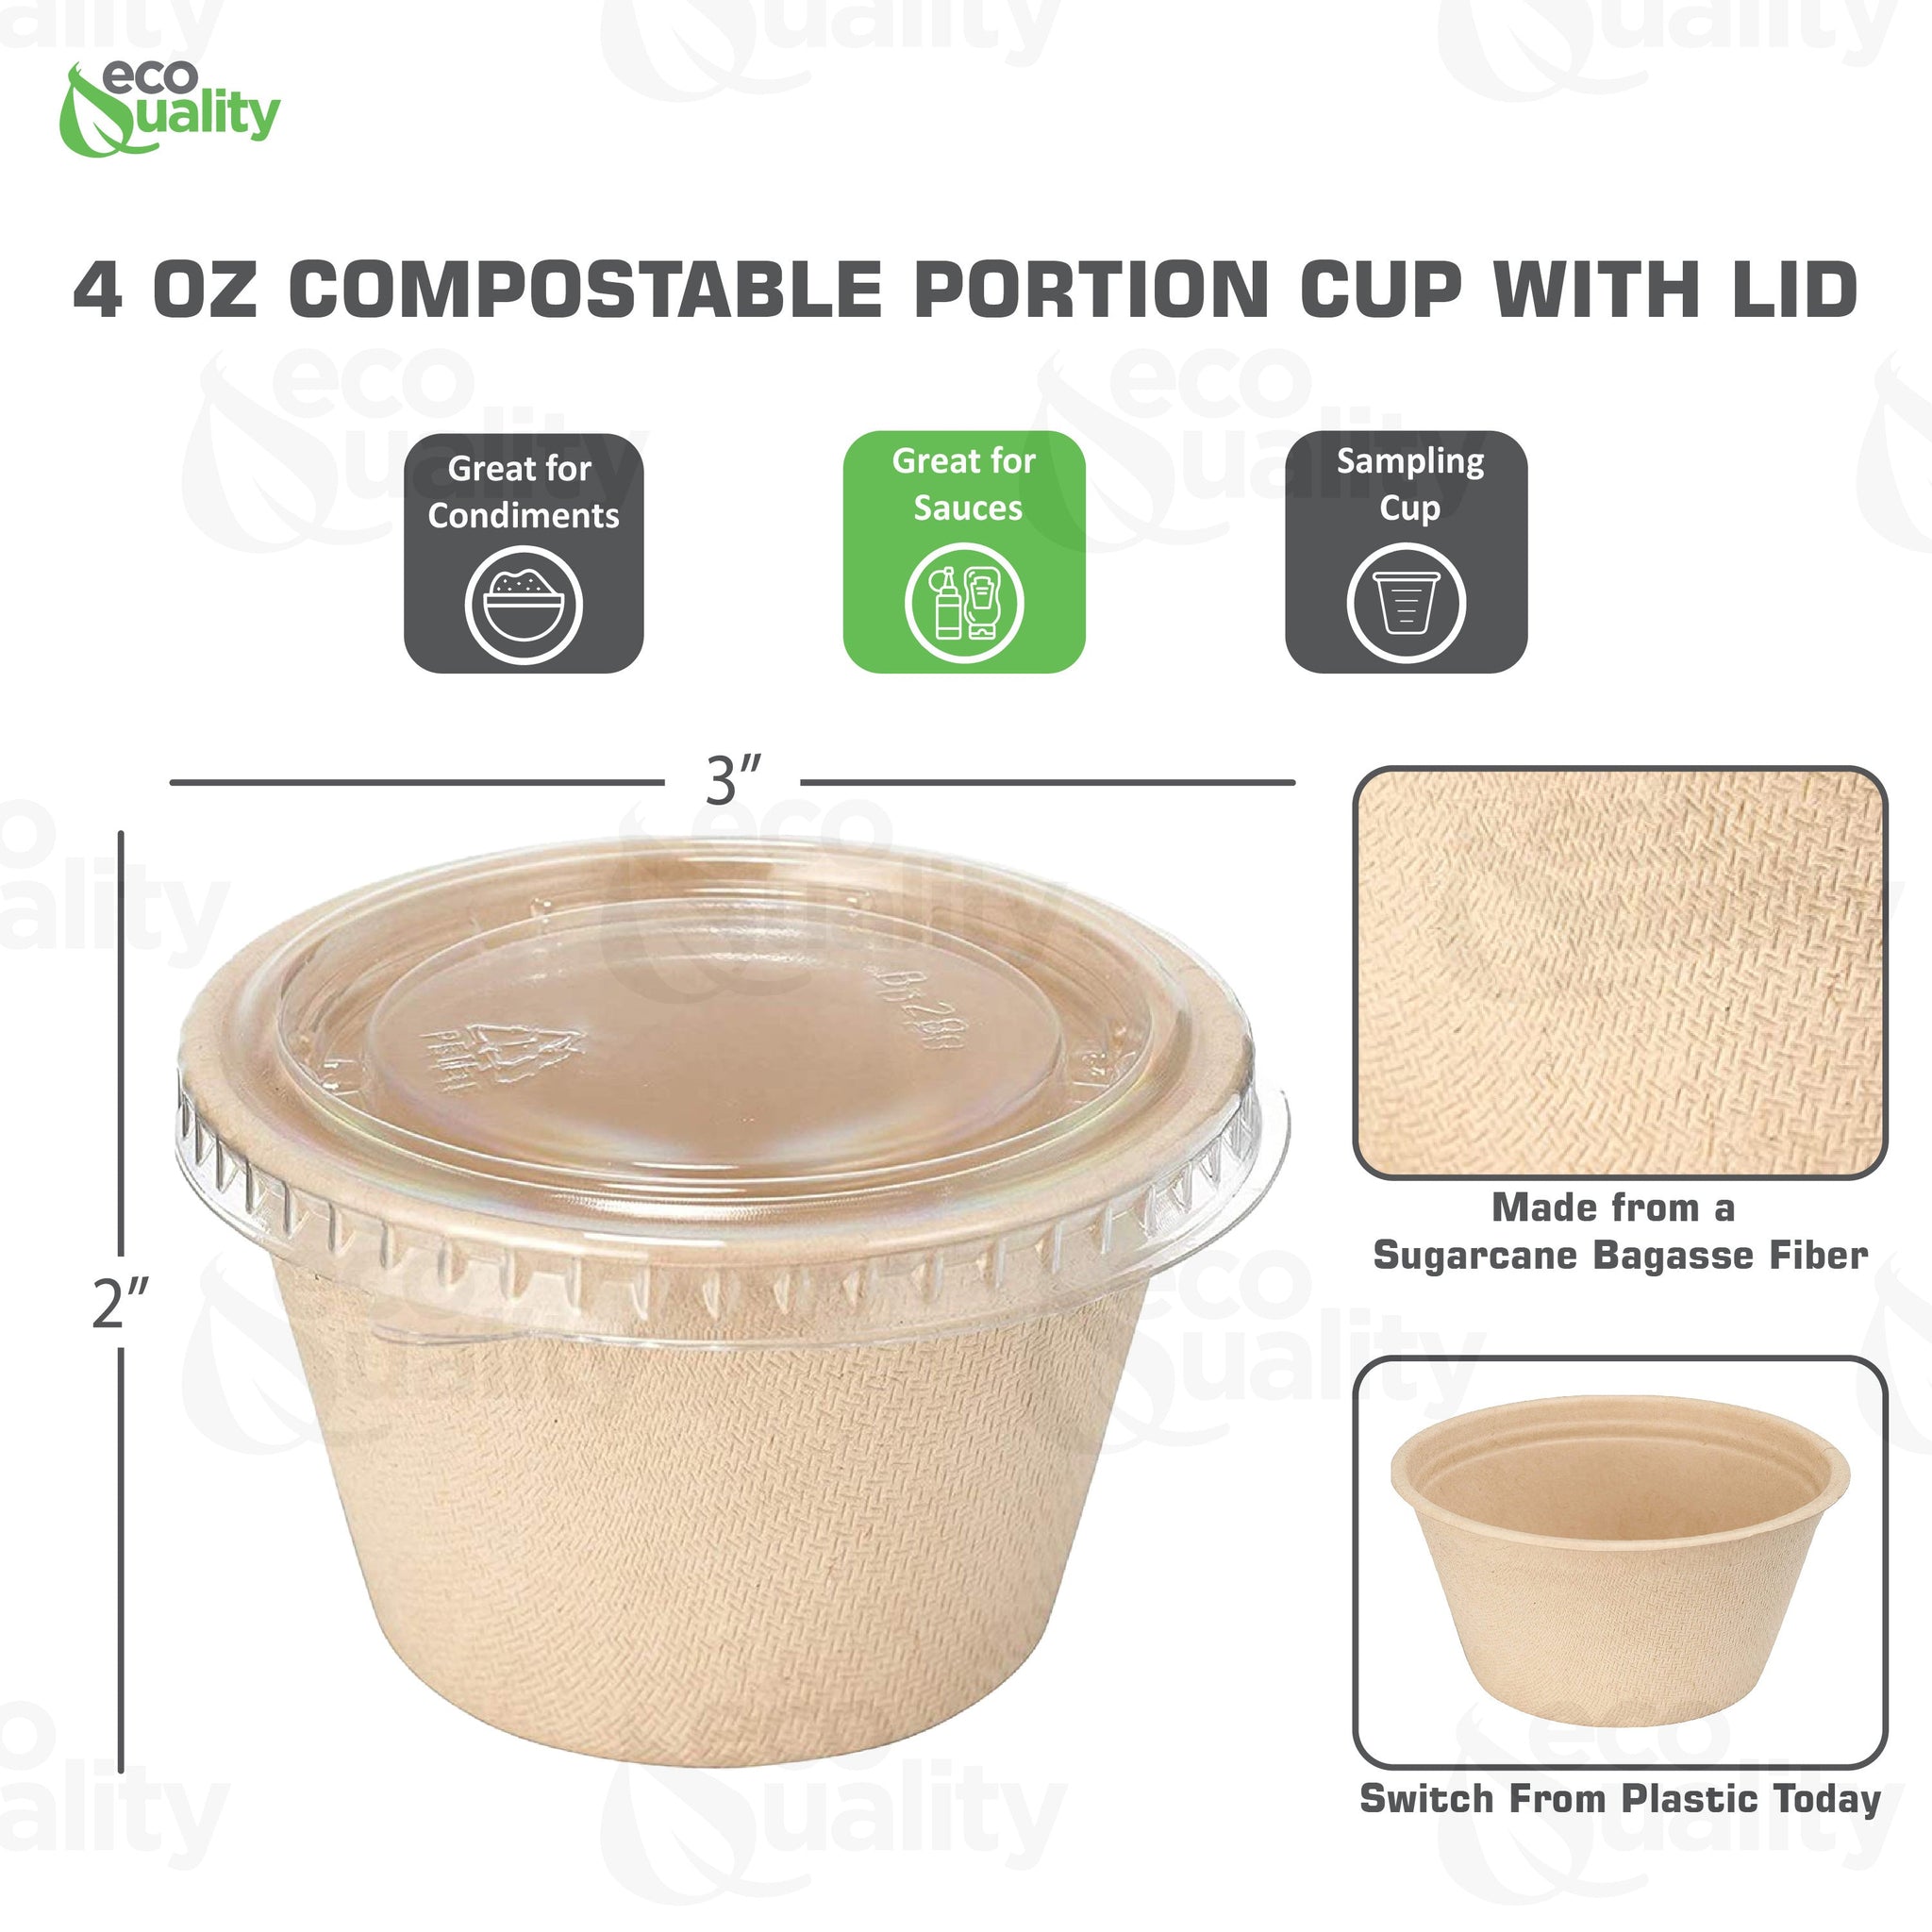 dipping cup delivery supplies togo cup with lid tasting cups souffle cups shot cup jelloshot tasting cup taste cup portion cup deliverysolutions food packaging disposablecups ketchup mustard cup artsandcraft small cup travel size cup mouthwash cup